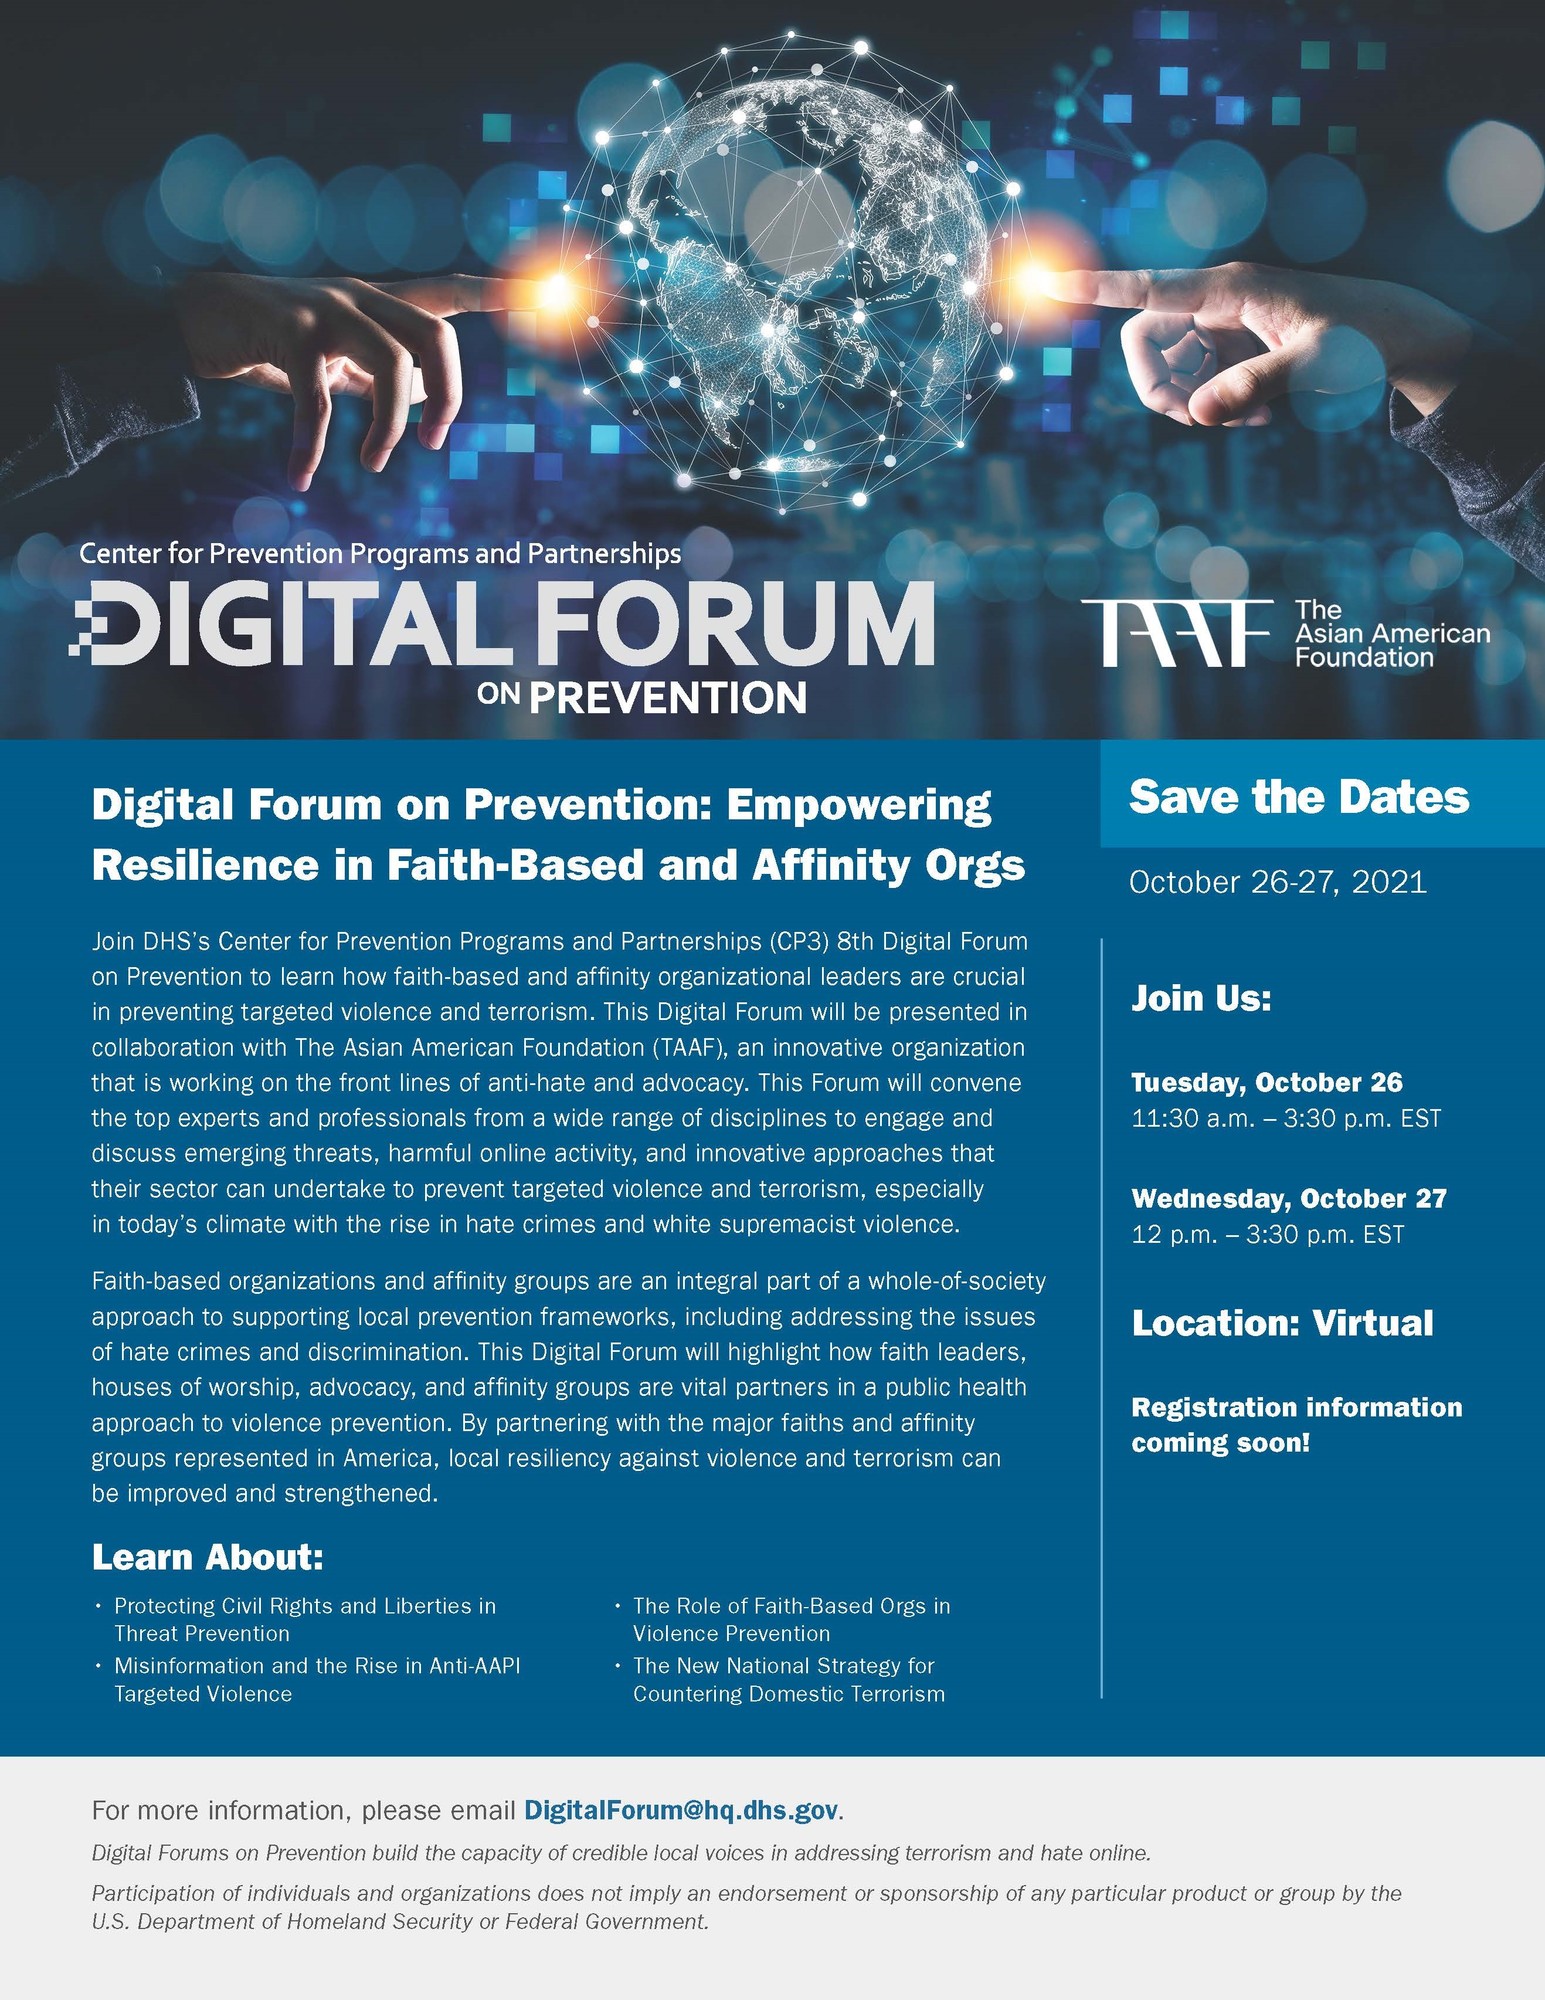 Digital Forum Save the Date